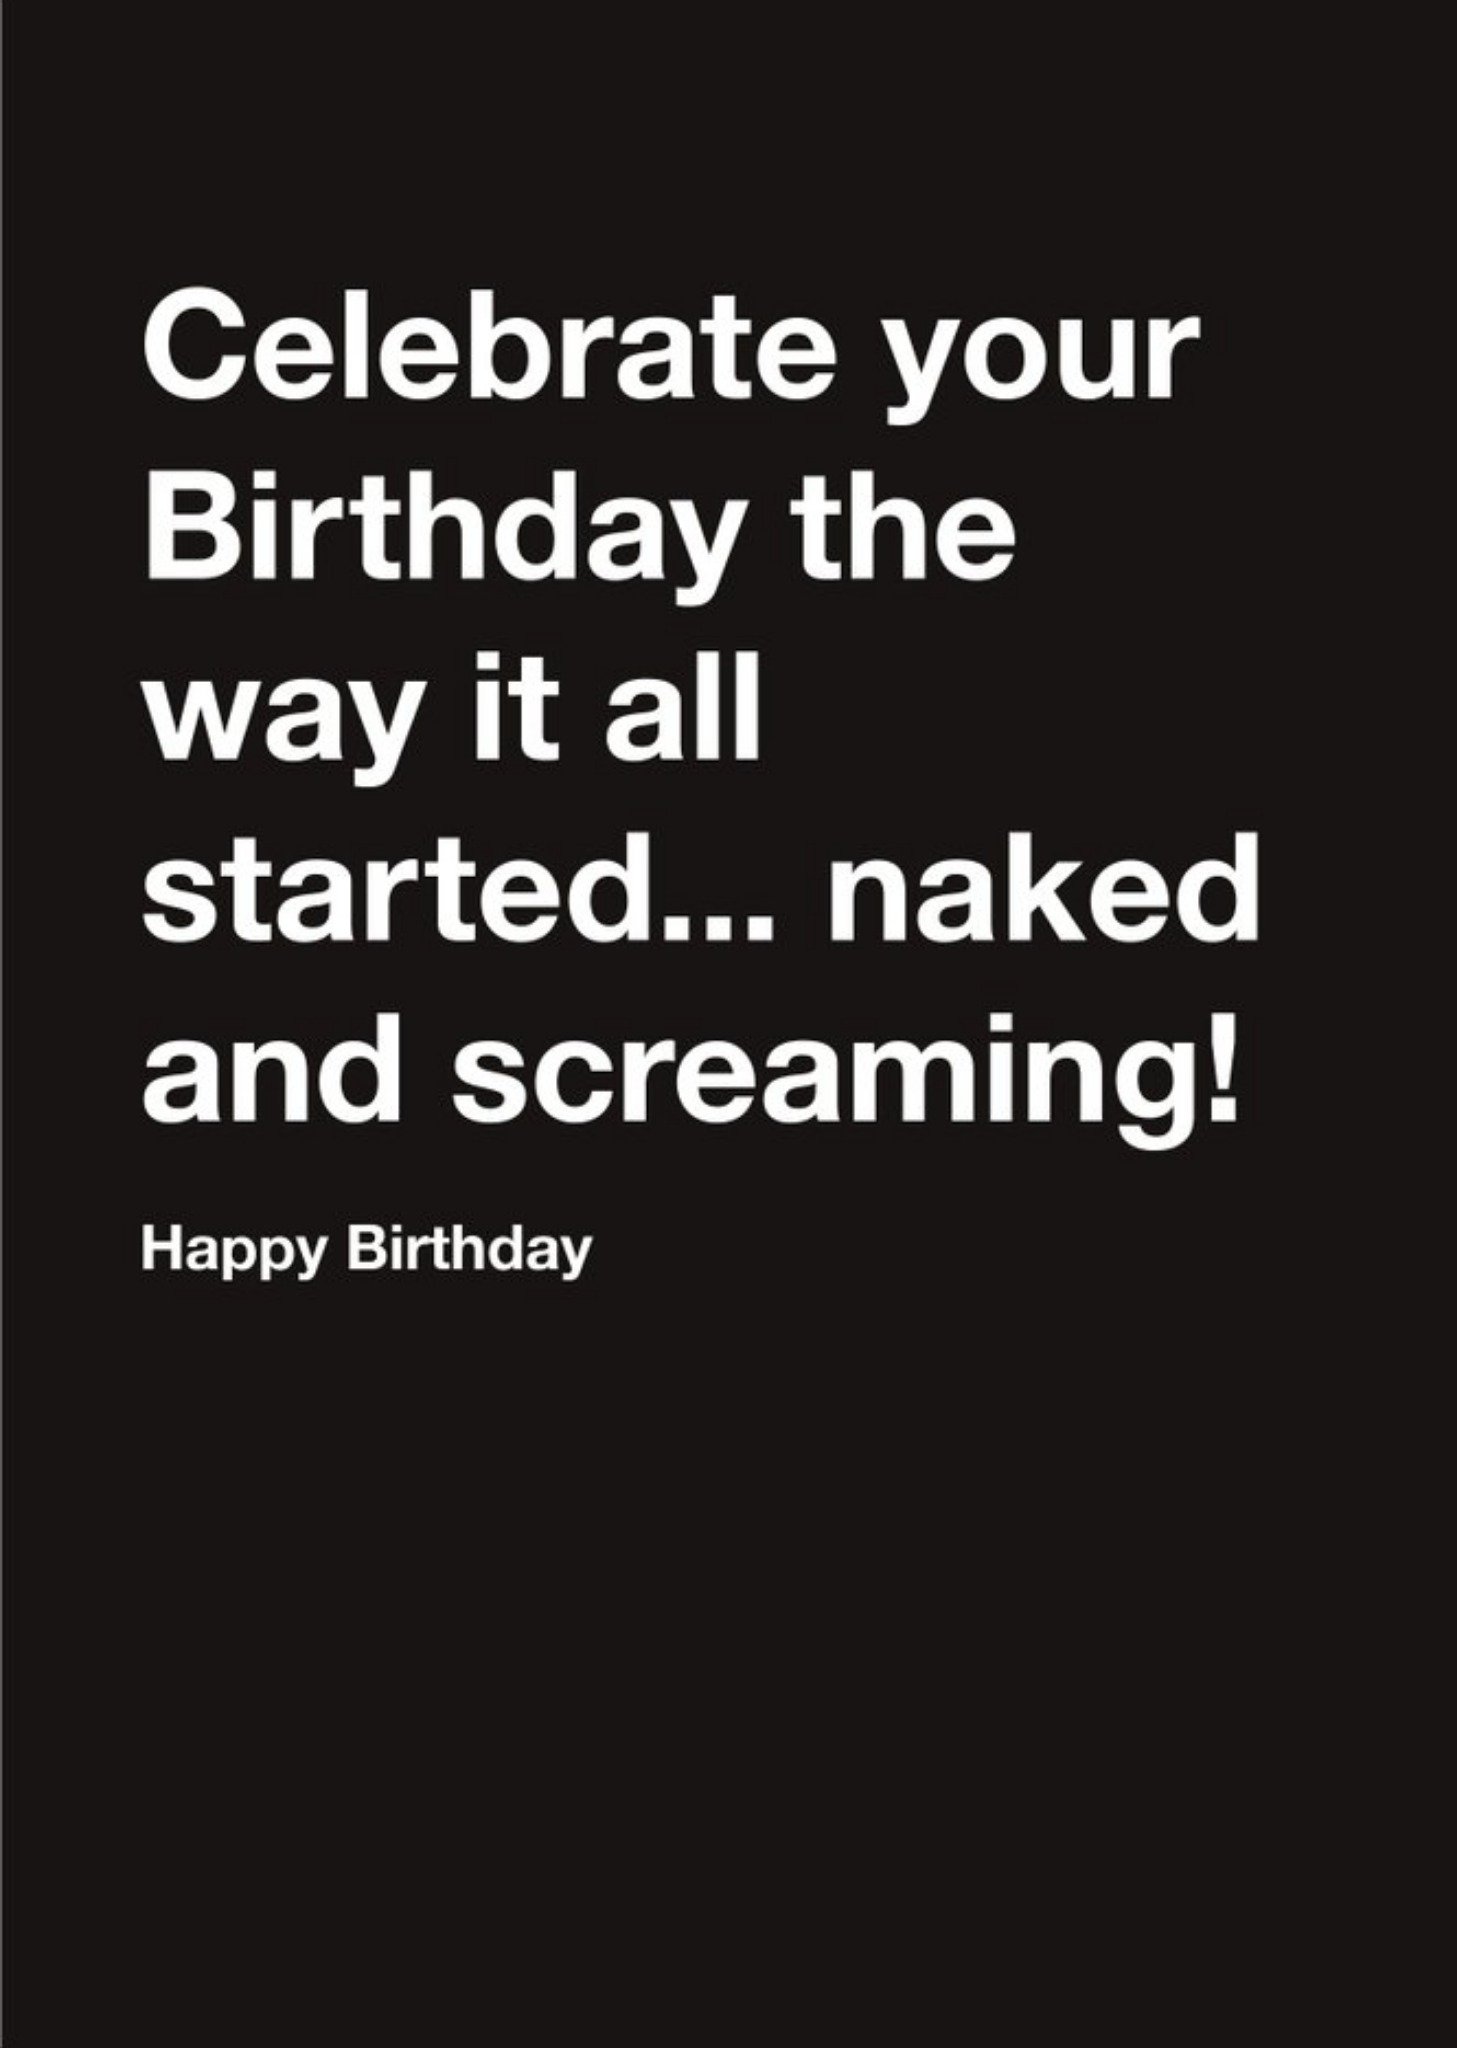 Moonpig Carte Blanche Celebrate Birthday Naked And Screaming Happy Birthday Card, Large